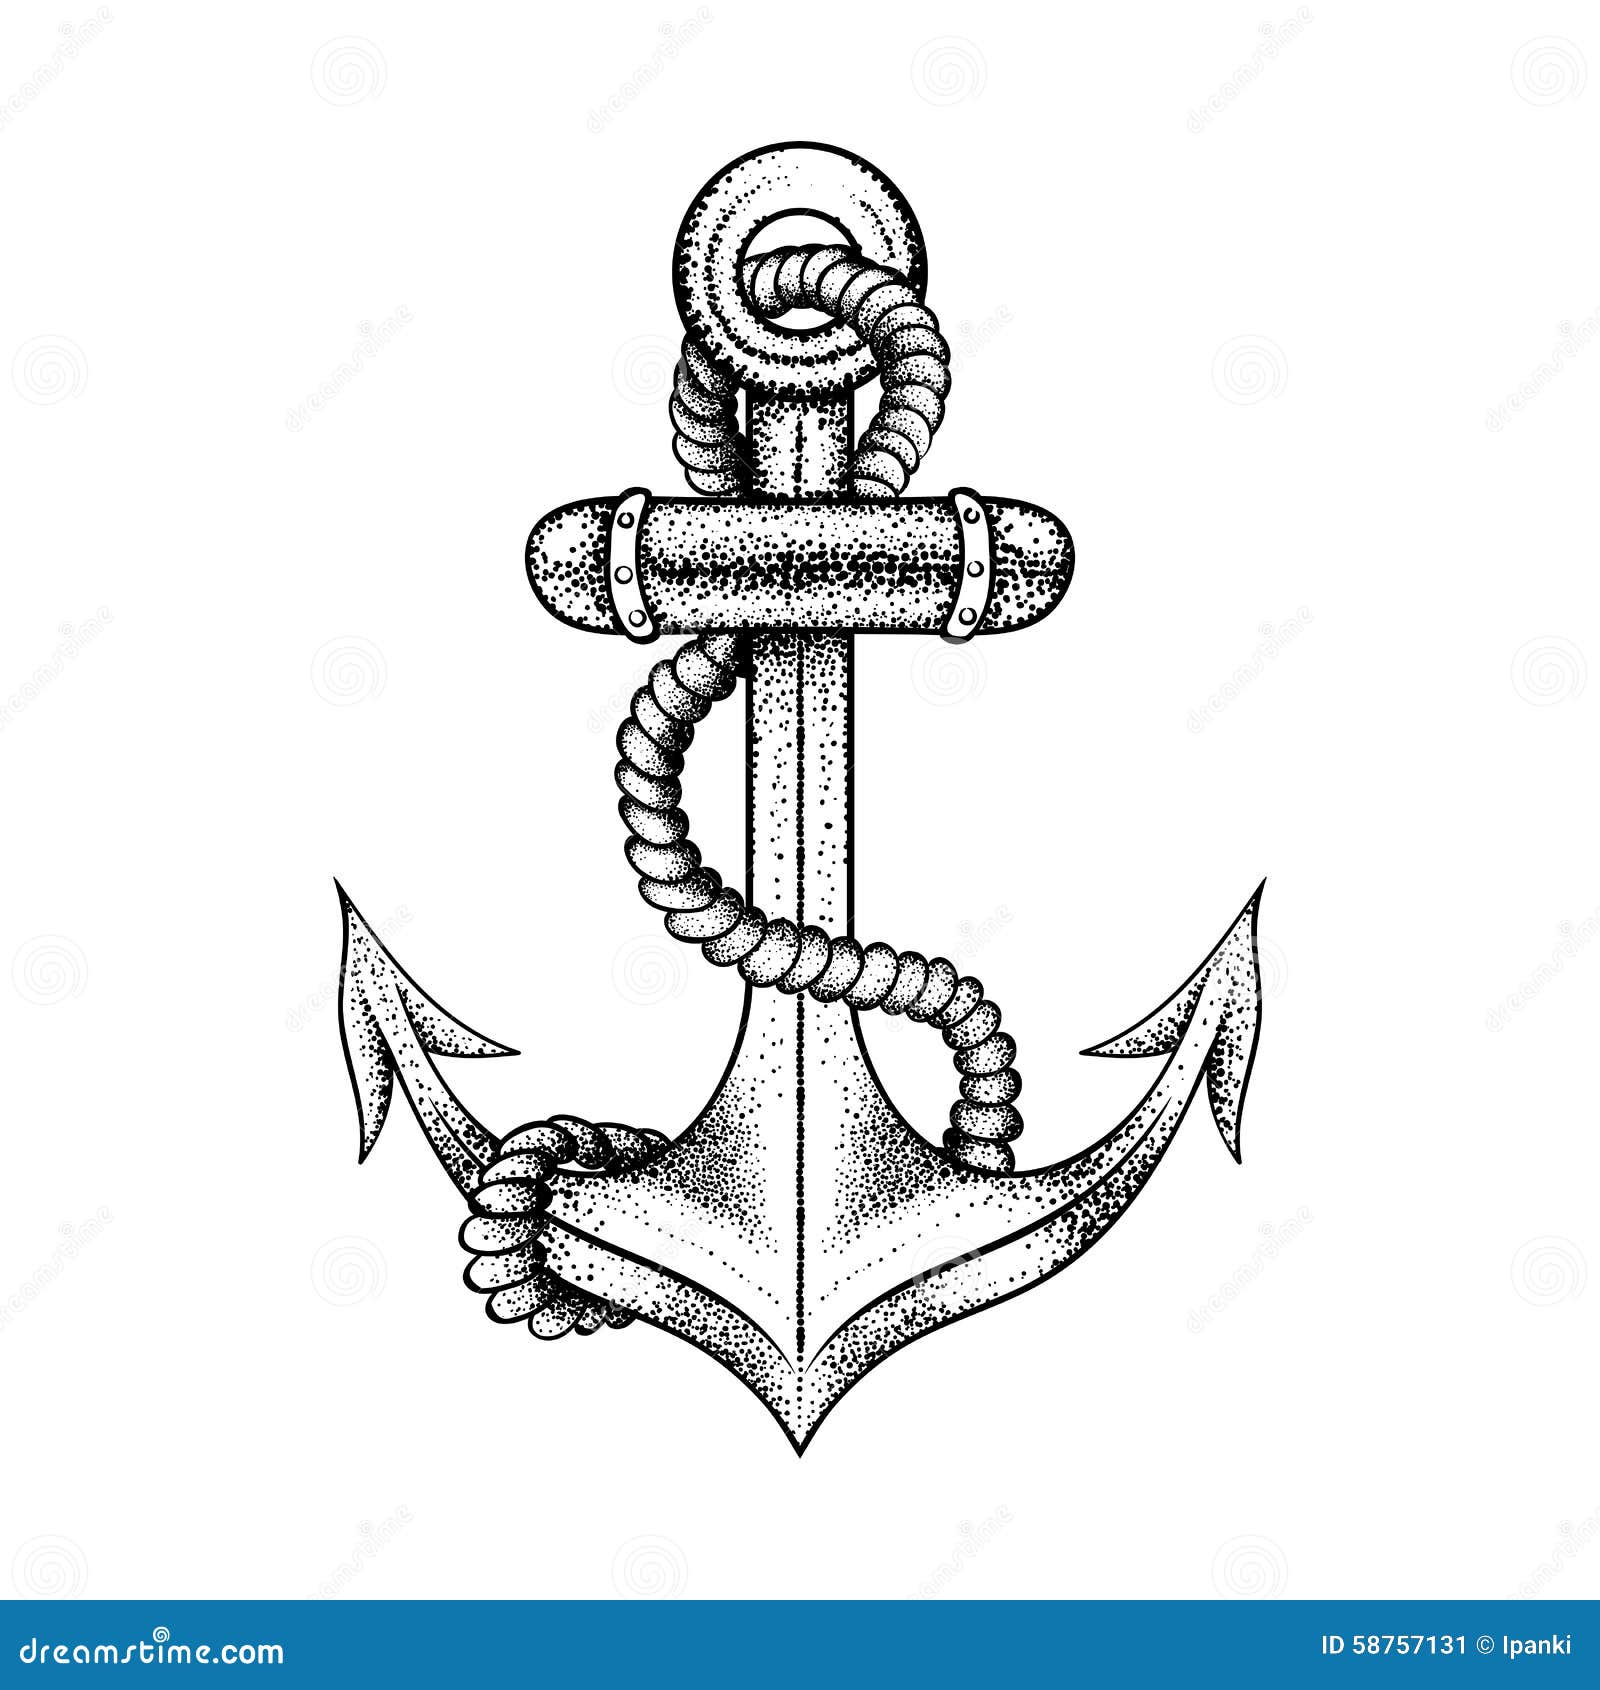 Hand Drawn Elegant Ship Sea Anchor With Rope Stock Vector - Image: 58757131